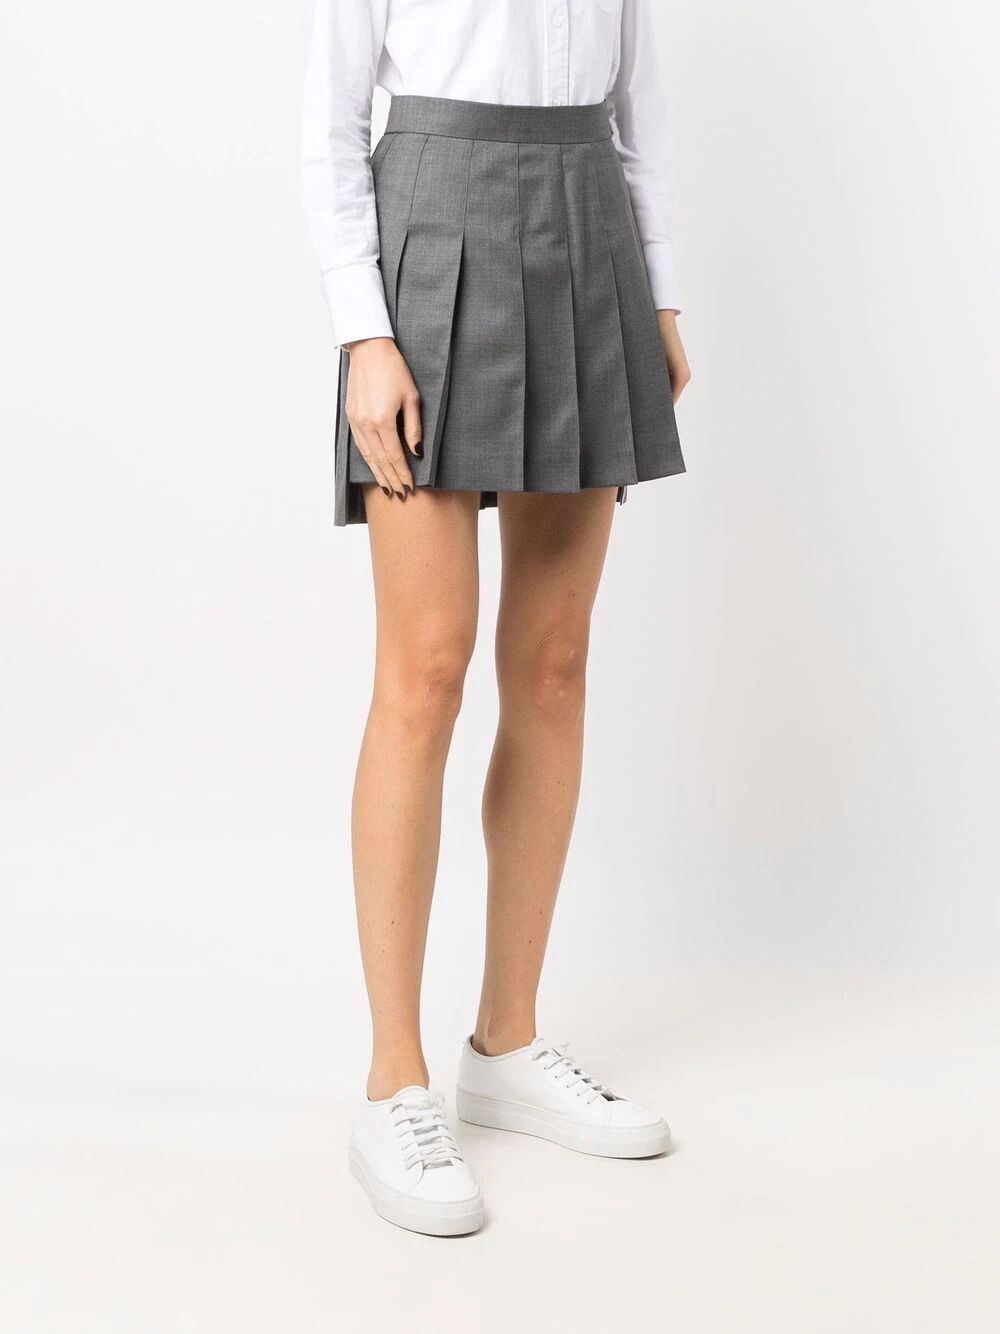 Thigh Length Dropped Back Pleated Skirt